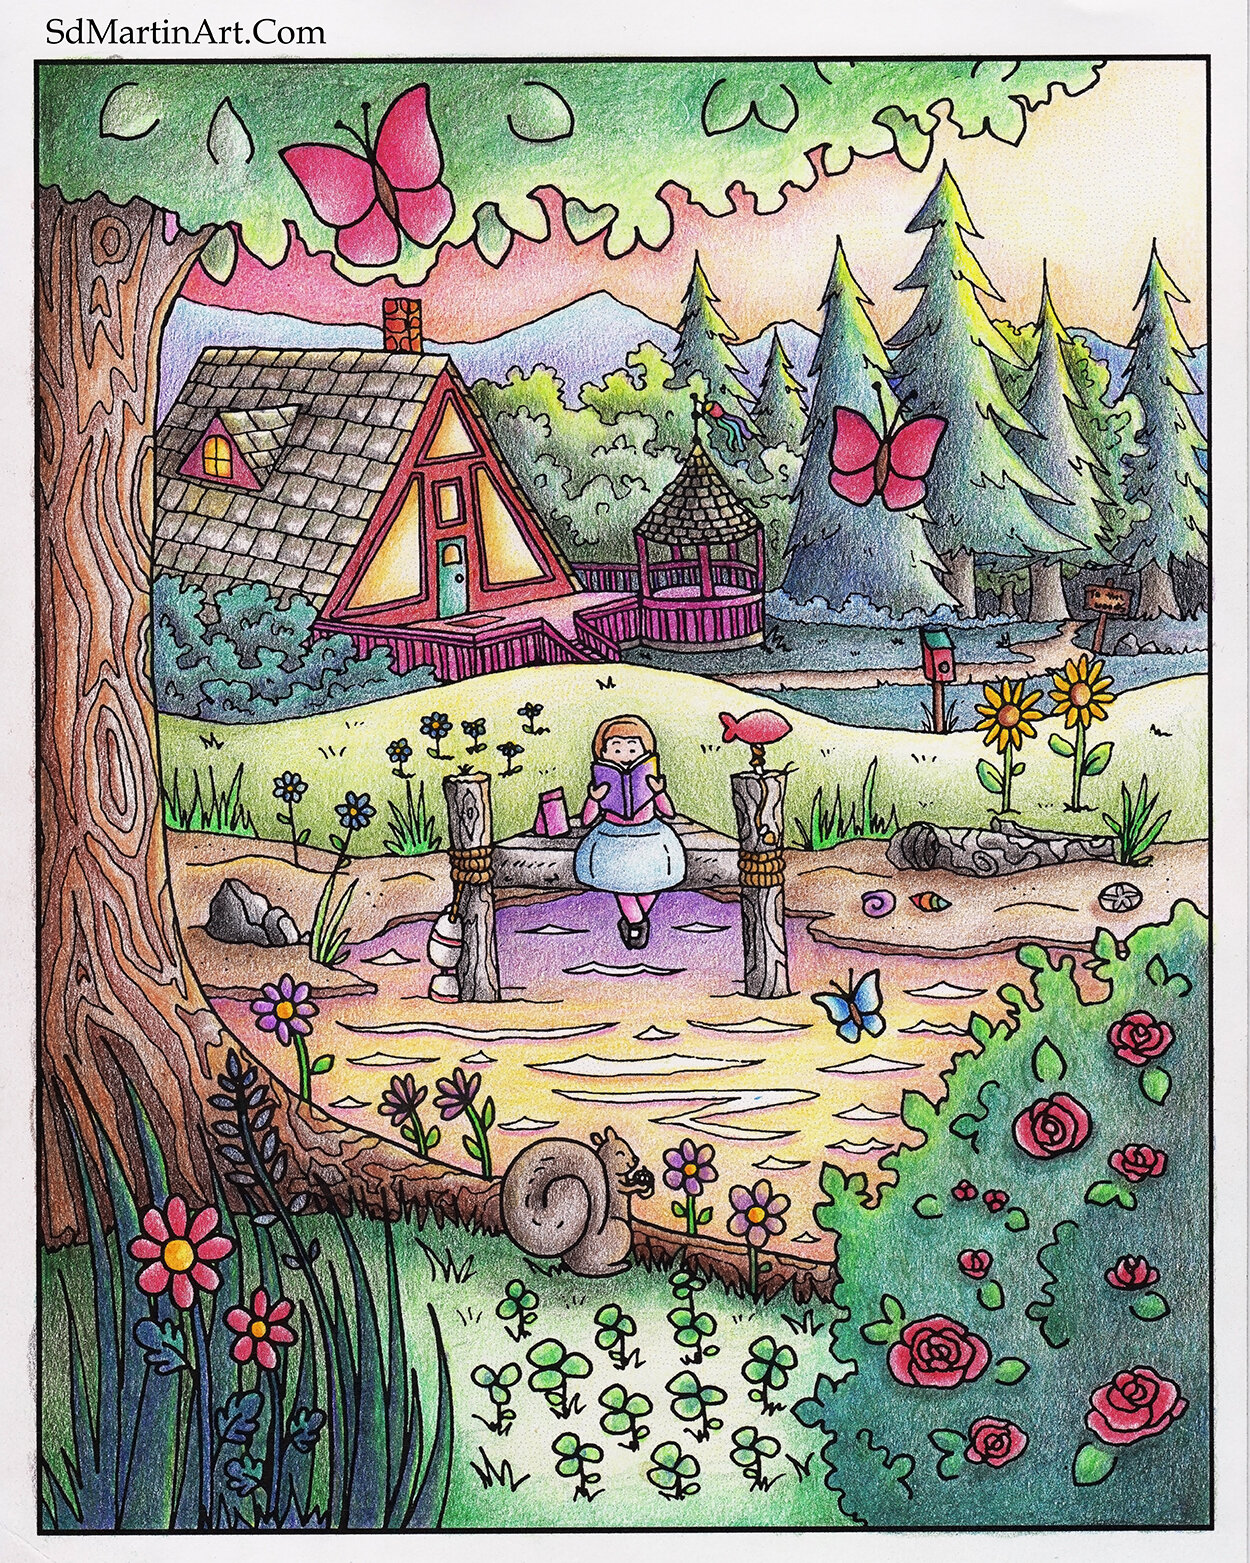 Free Coloring Page_A Frame Cottage_Coloring Progress 5 _color scan_Edited LR with WM.jpg